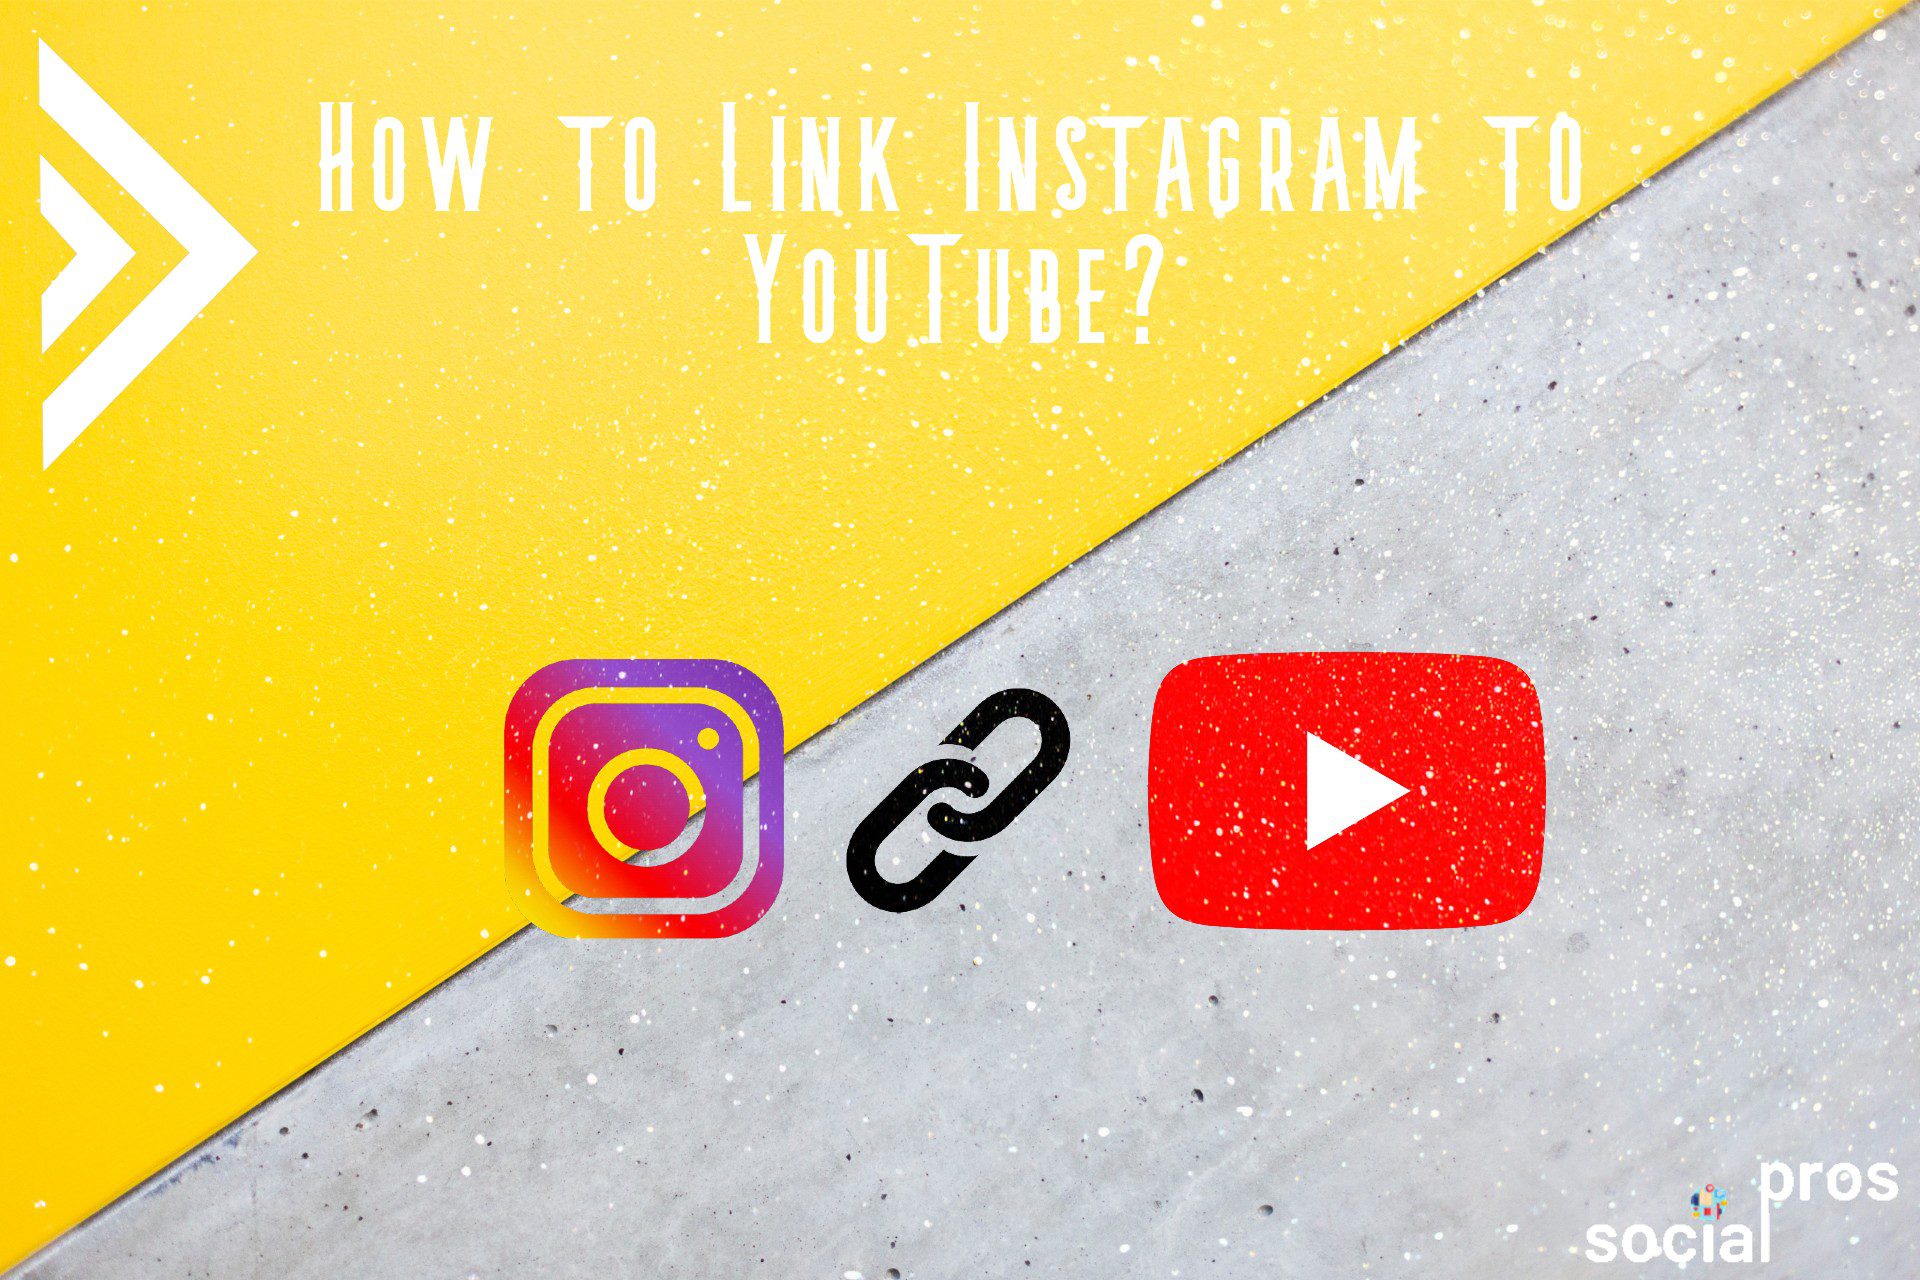 how to link Instagram to Youtube